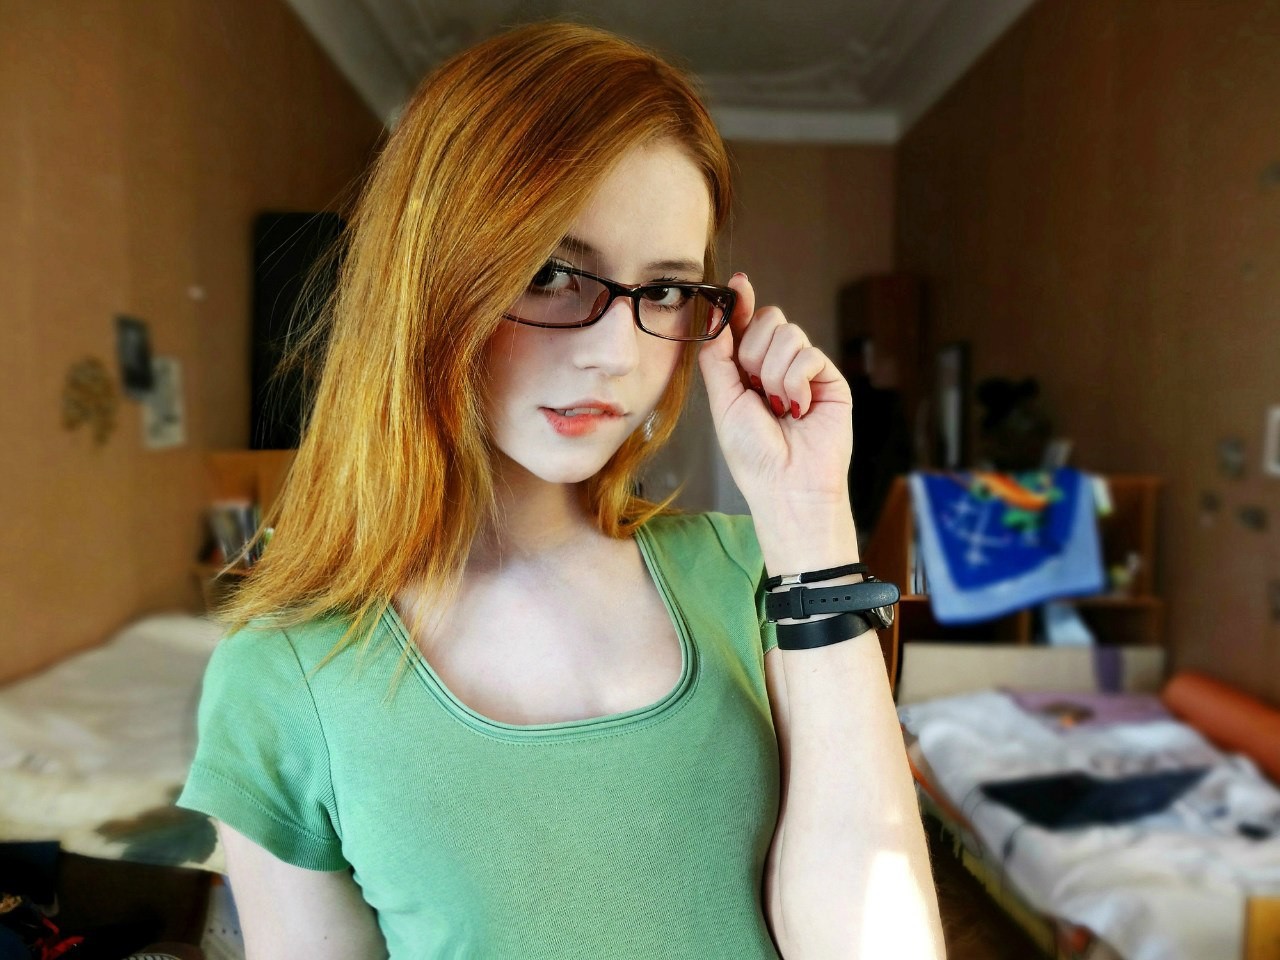 free live sex cams live sex chat and live porn shows #teen #cutie #nn #tits  #glasses